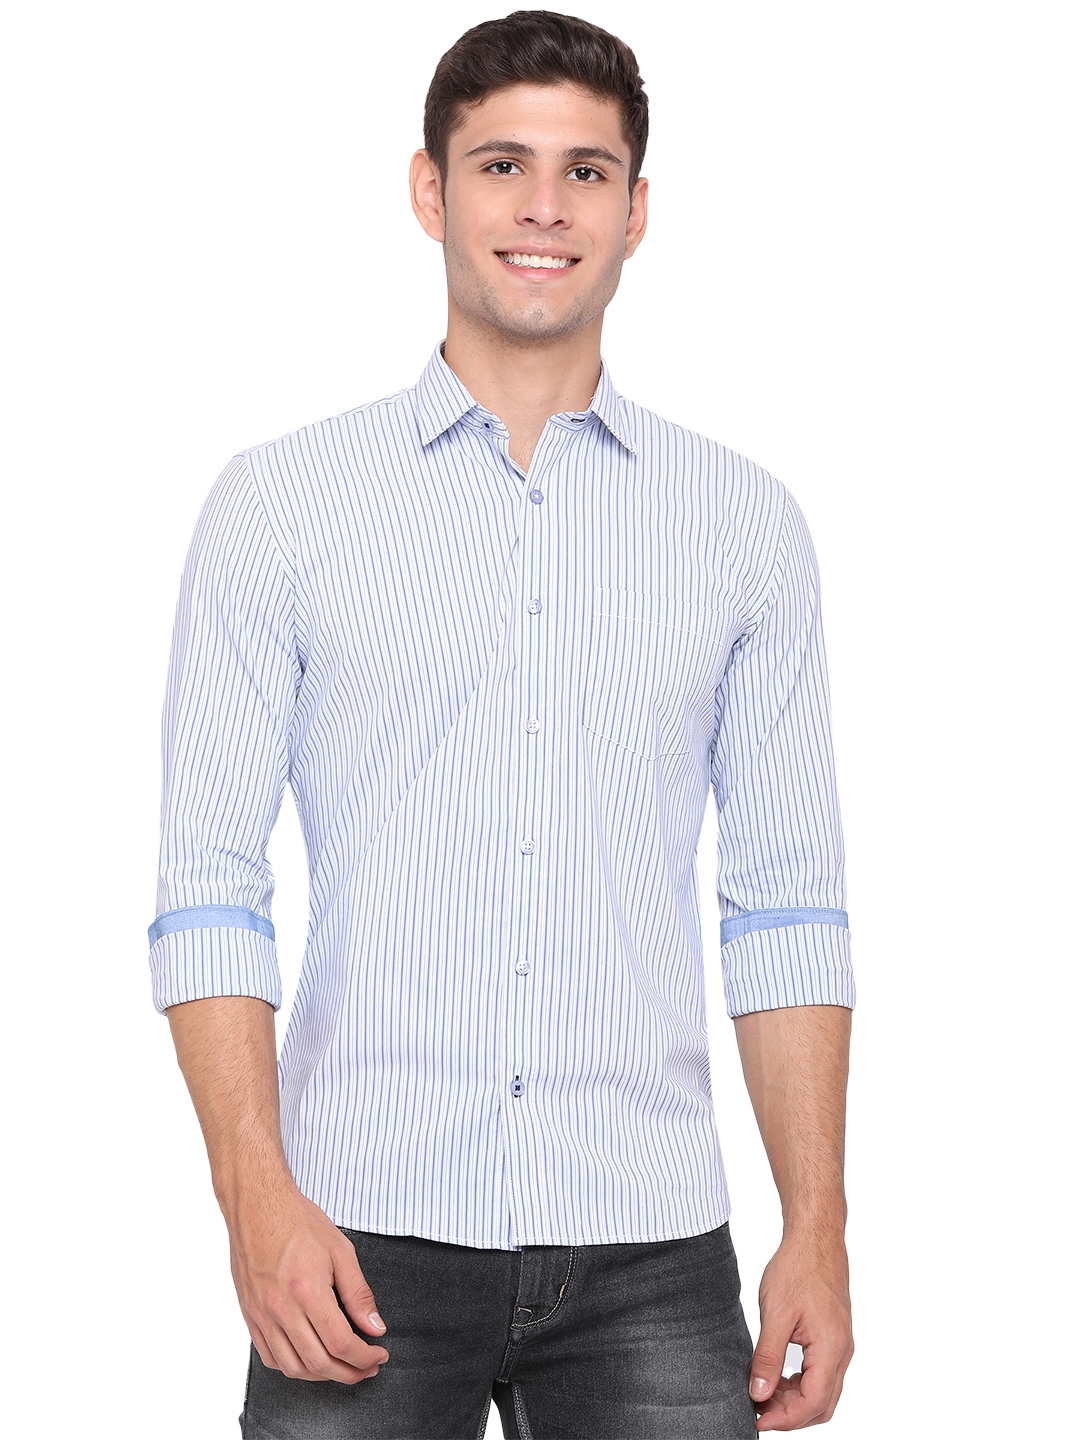 Greenfibre | Cashmere Blue Striped Slim Fit Casual Shirt | Greenfibre